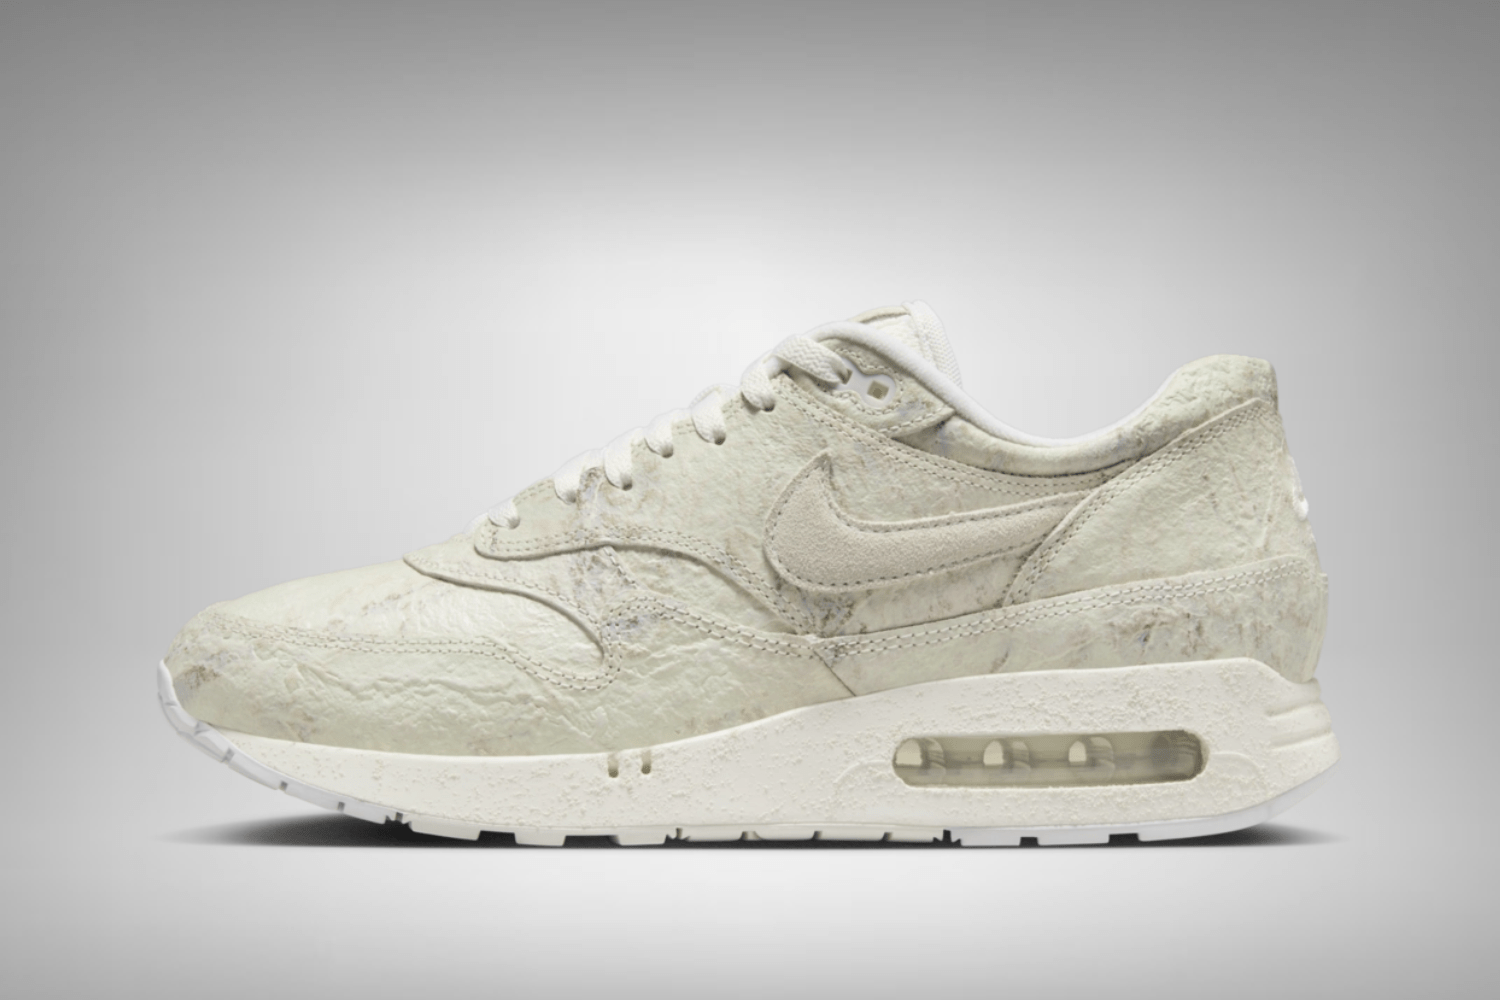 The Nike Air Max 1 ’86 OG 'Museum Masterpiece' is dropping soon